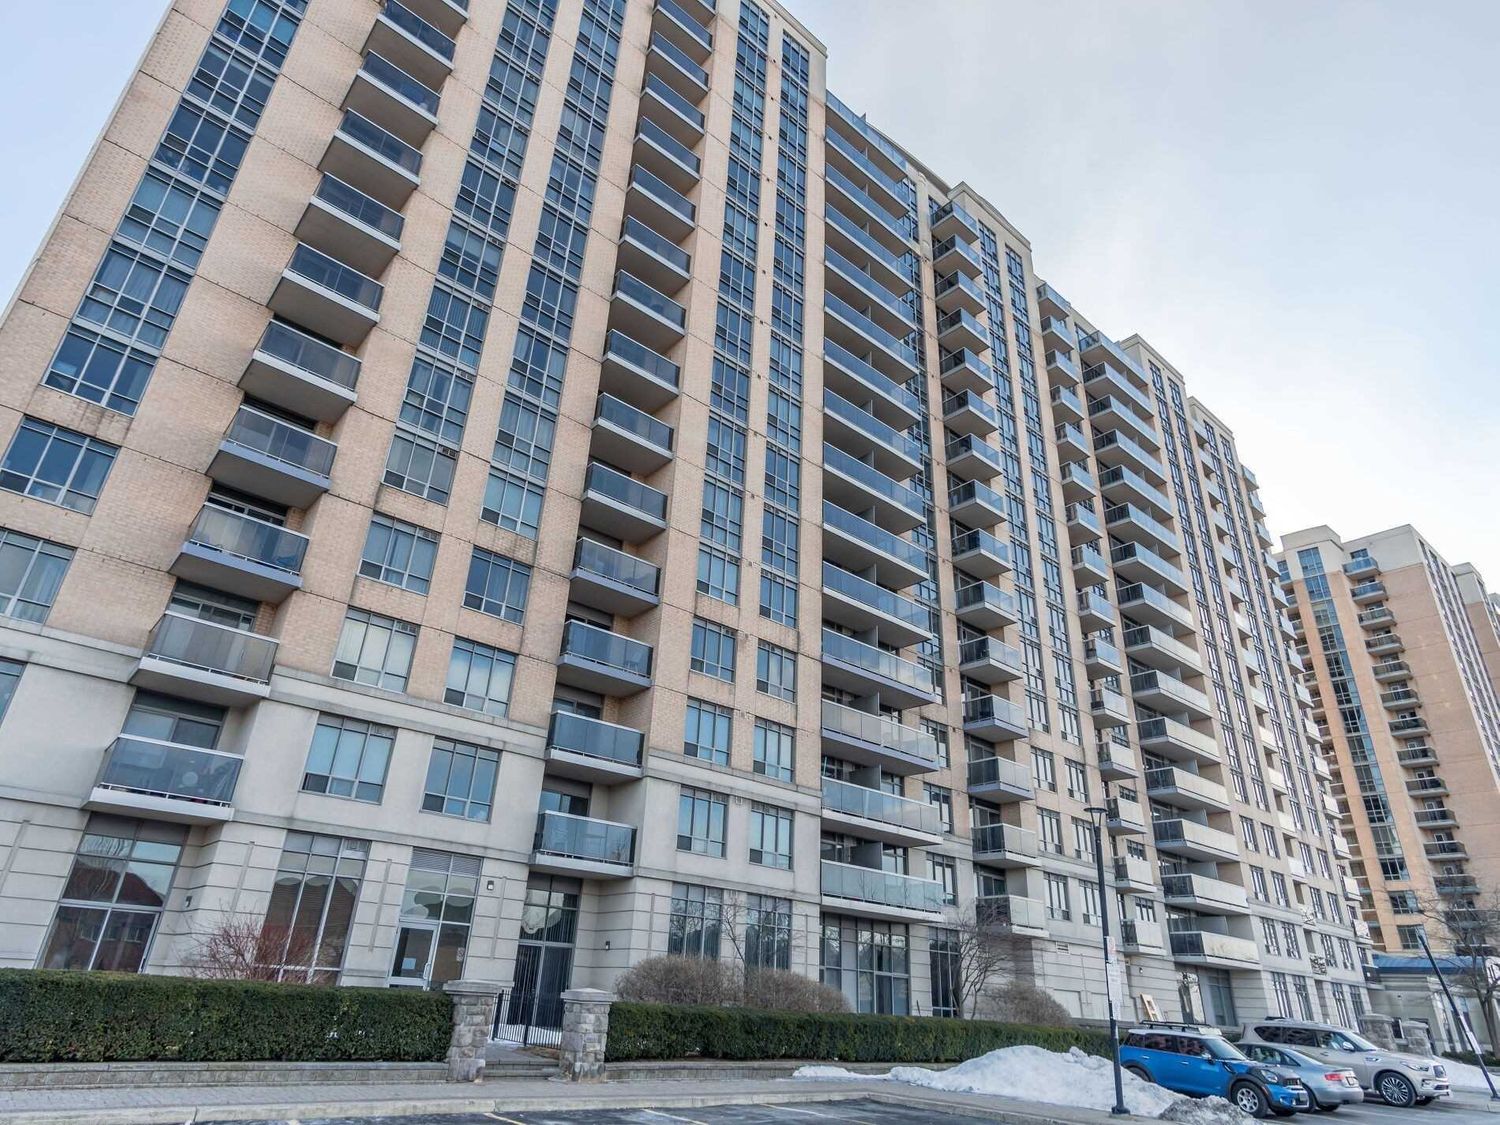 8 Mondeo Drive. Mondeo Springs Condos is located in  Scarborough, Toronto - image #2 of 3